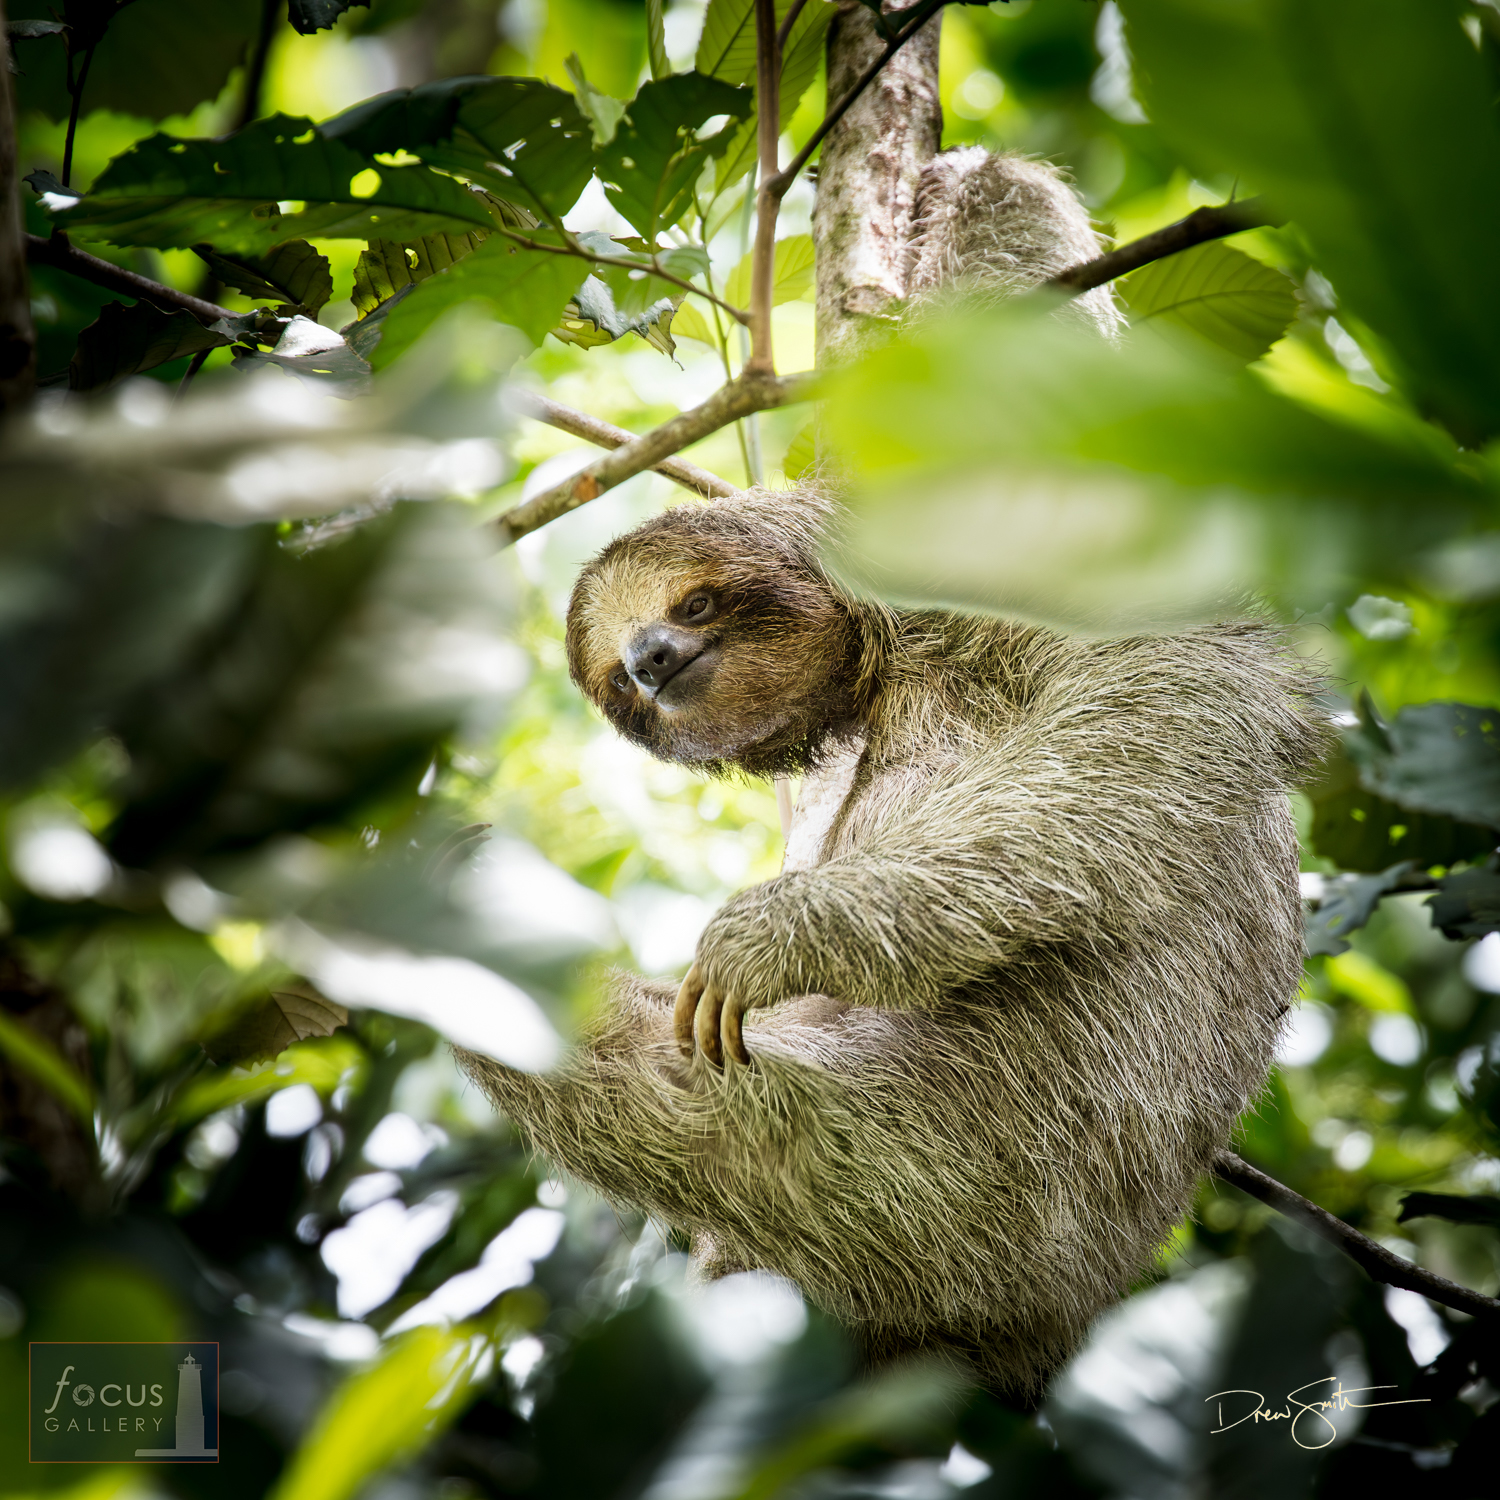 A   Three-toed Sloth peers through the branches of a tree as if playing   peek-a-boo.